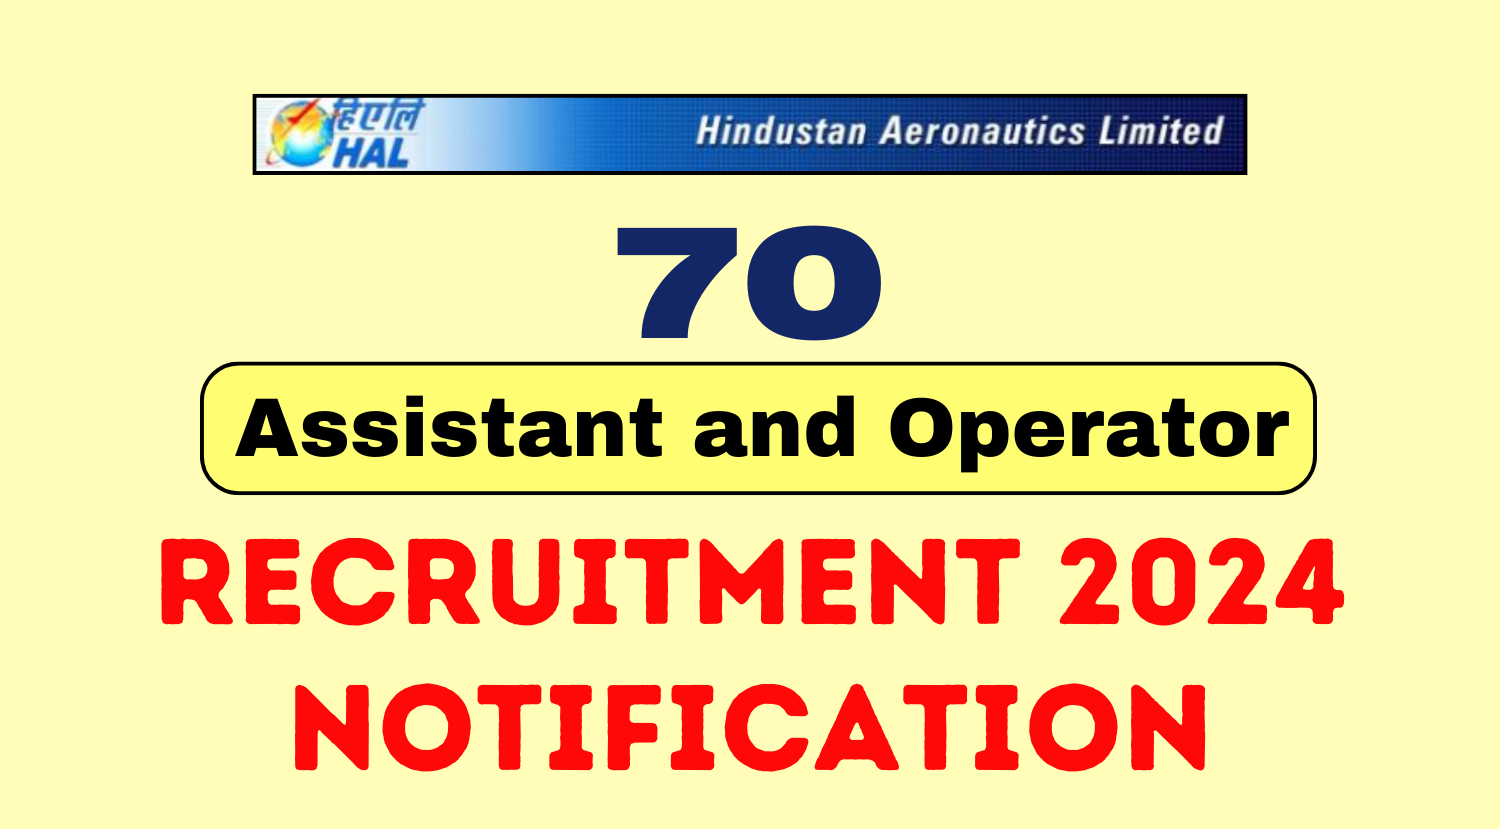 HAL Assistant and Operator Recruitment 2024 Notification